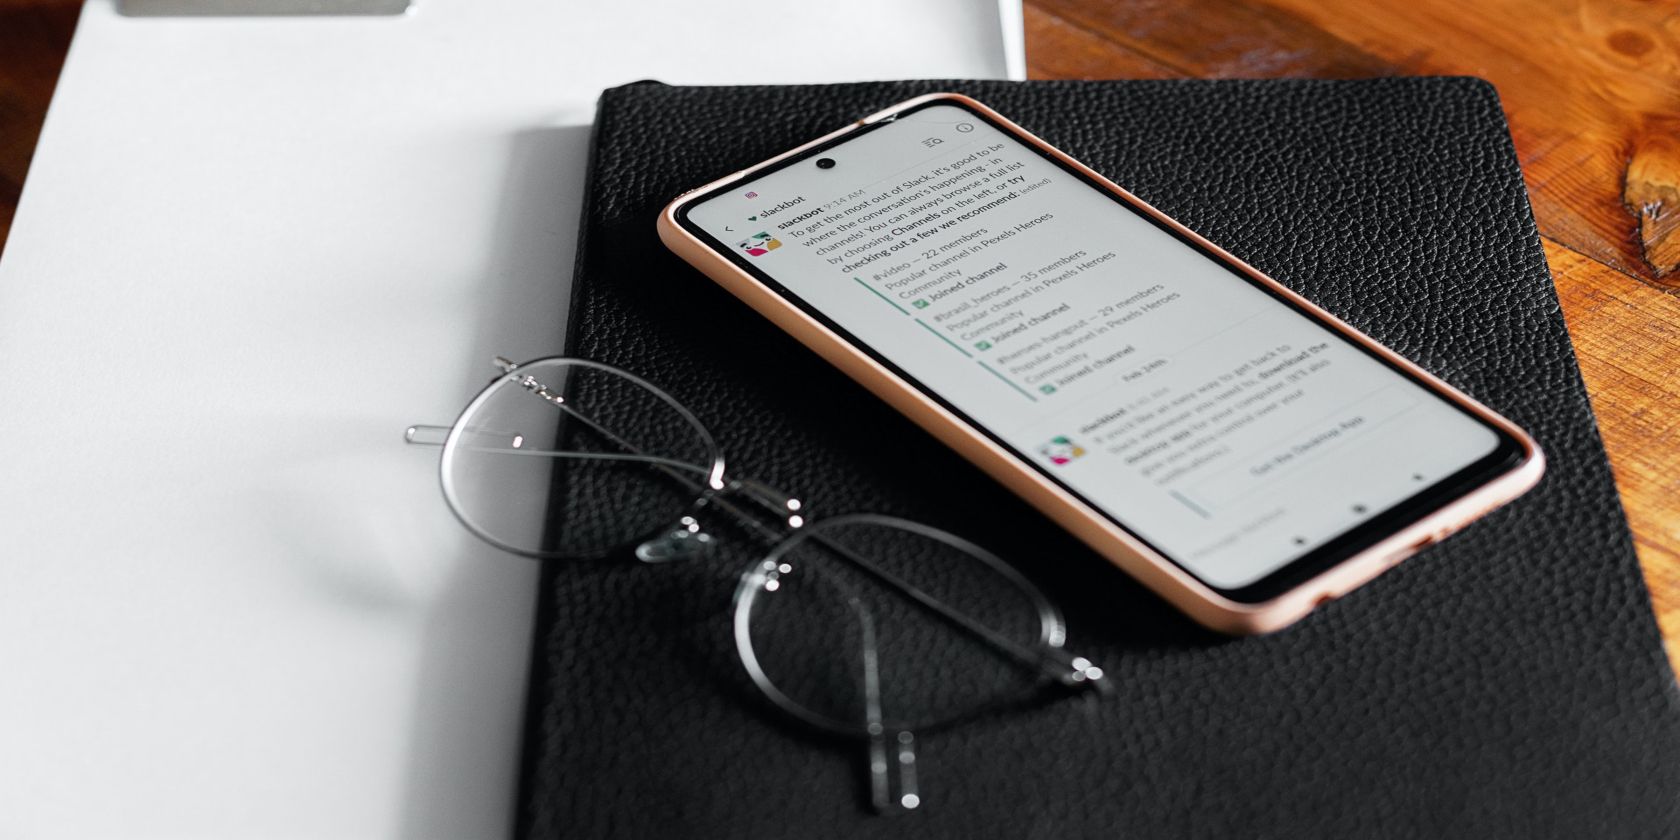 Image shows an iPhone with the Slack app opened on top of a black notebook